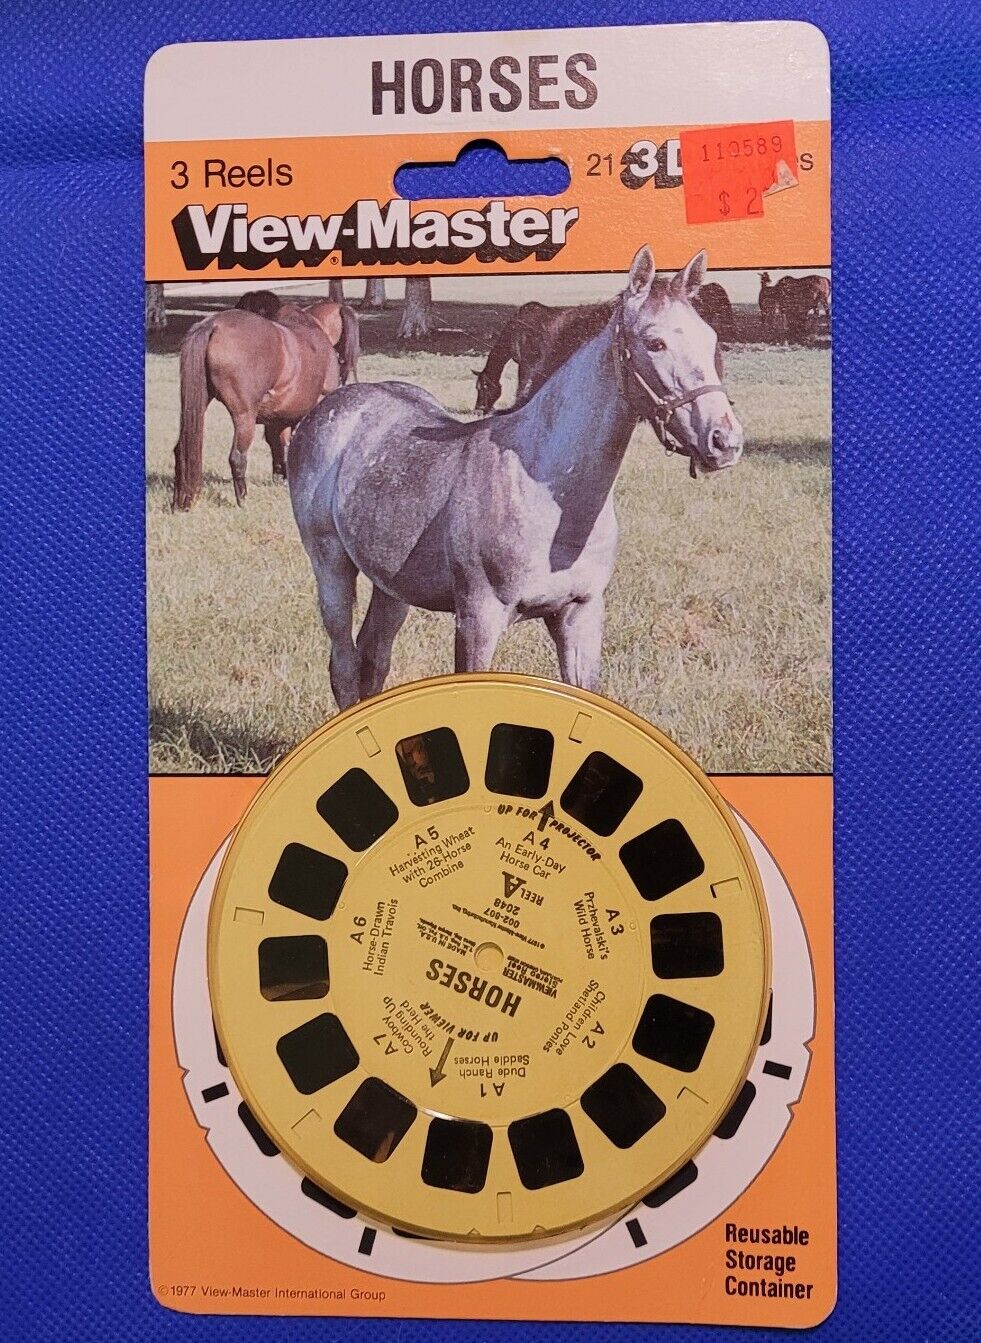 Gaf Sealed 2048 Horses Breeds Special Subjects view-master 3 Reels Pack Packet